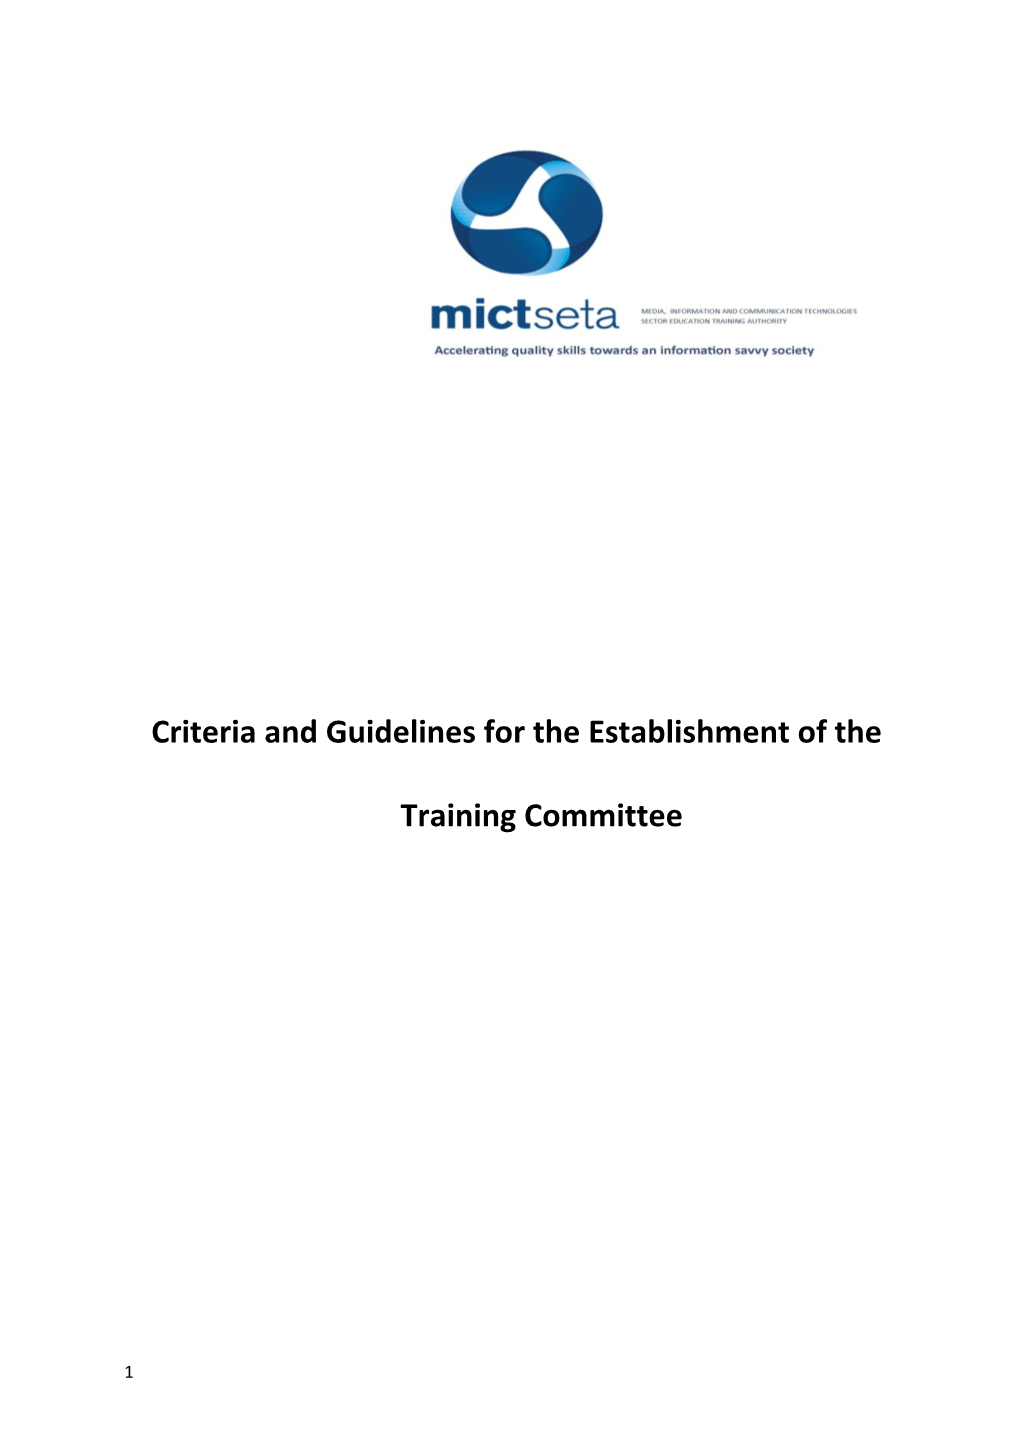 Criteria and Guidelines for the Establishment of the Training Committee